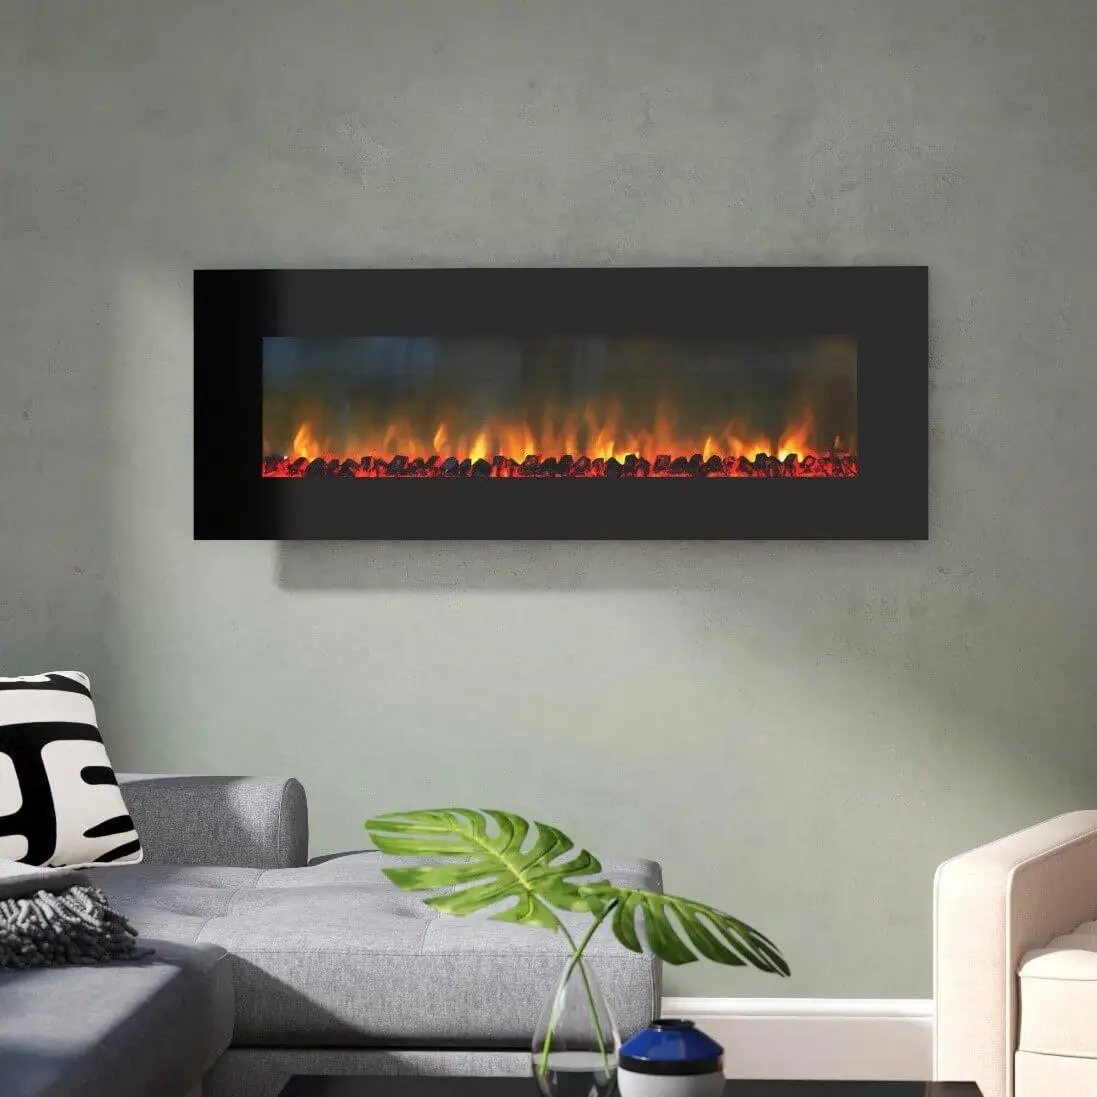 wall-mounted electric fireplace ideas